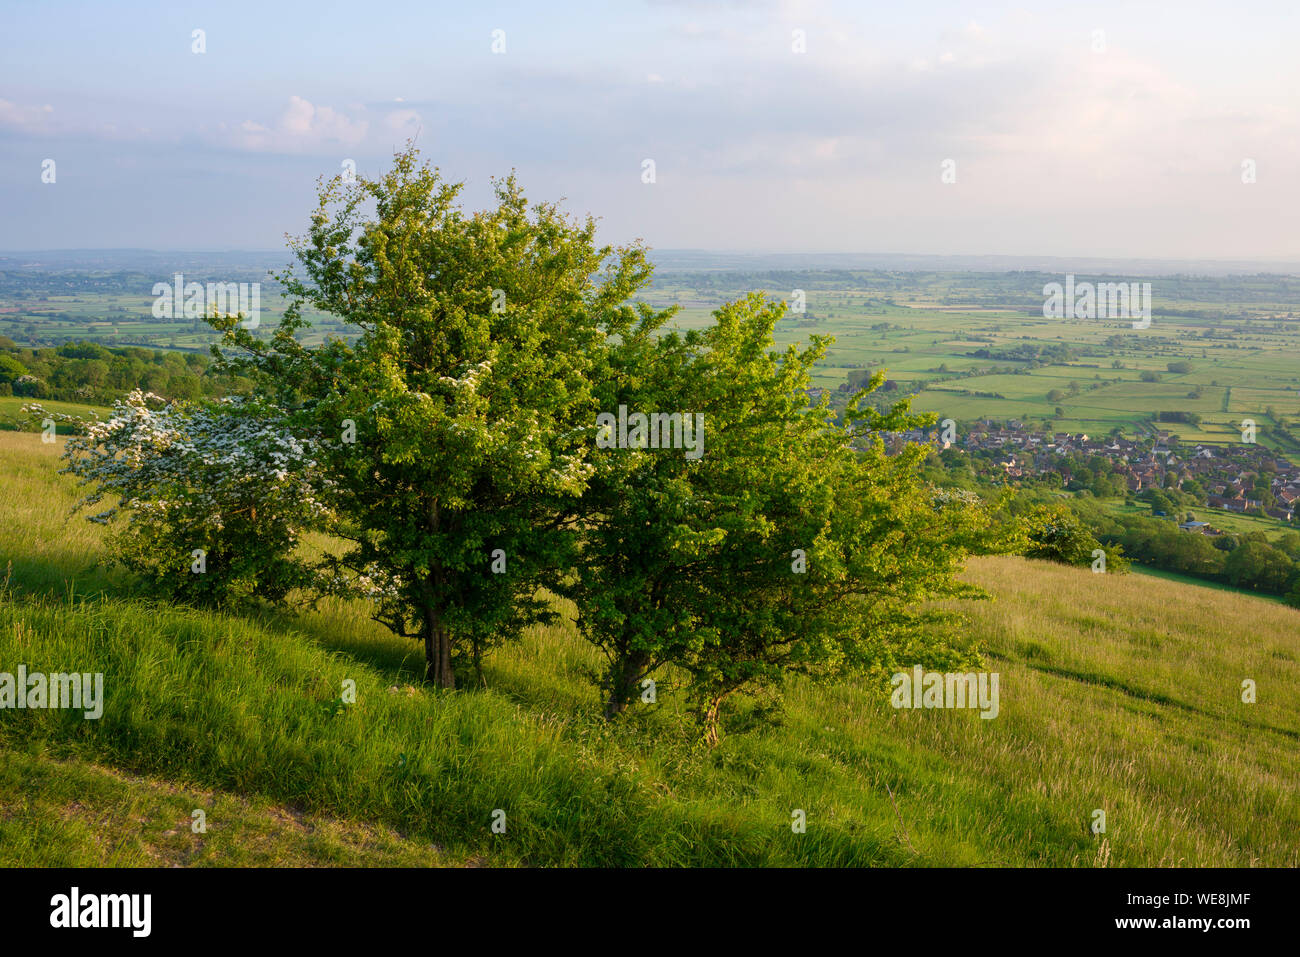 Common Hawthorn on Draycott Sleights in the Mendip Hills National Landscape, Somerset, England. Stock Photo